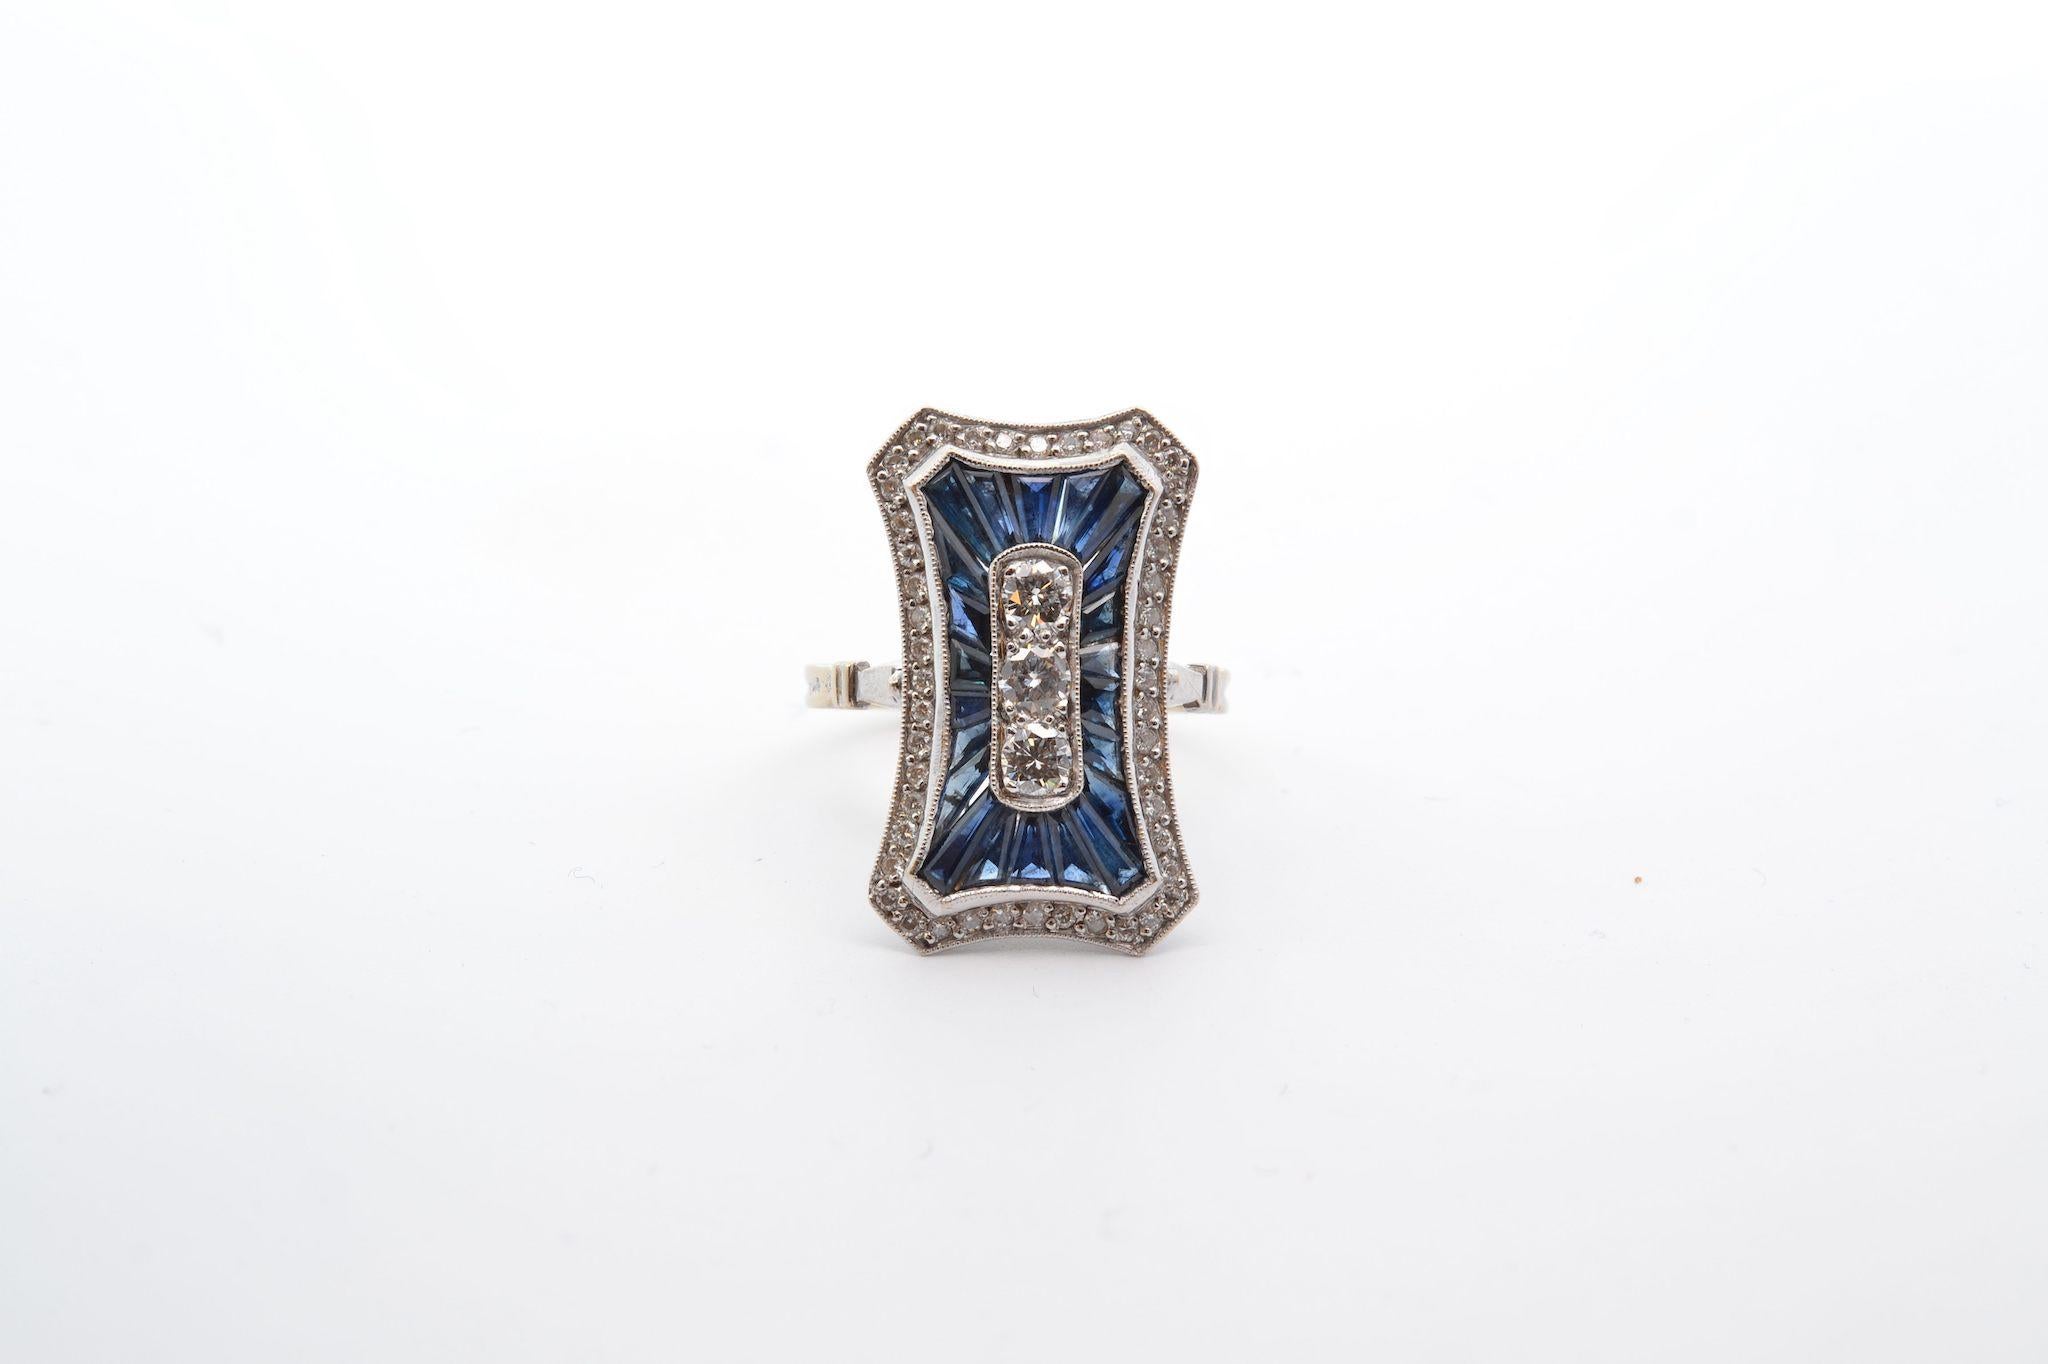 Stones: 51 diamonds: 1.05cts, 22 sapphires: 2.1cts
Material: 18k gold
Dimensions: 2.3cm x 1.4cm
Weight: 6g
Period: Recent
Size: 53 (free sizing)
Certificate
Ref. : 25178